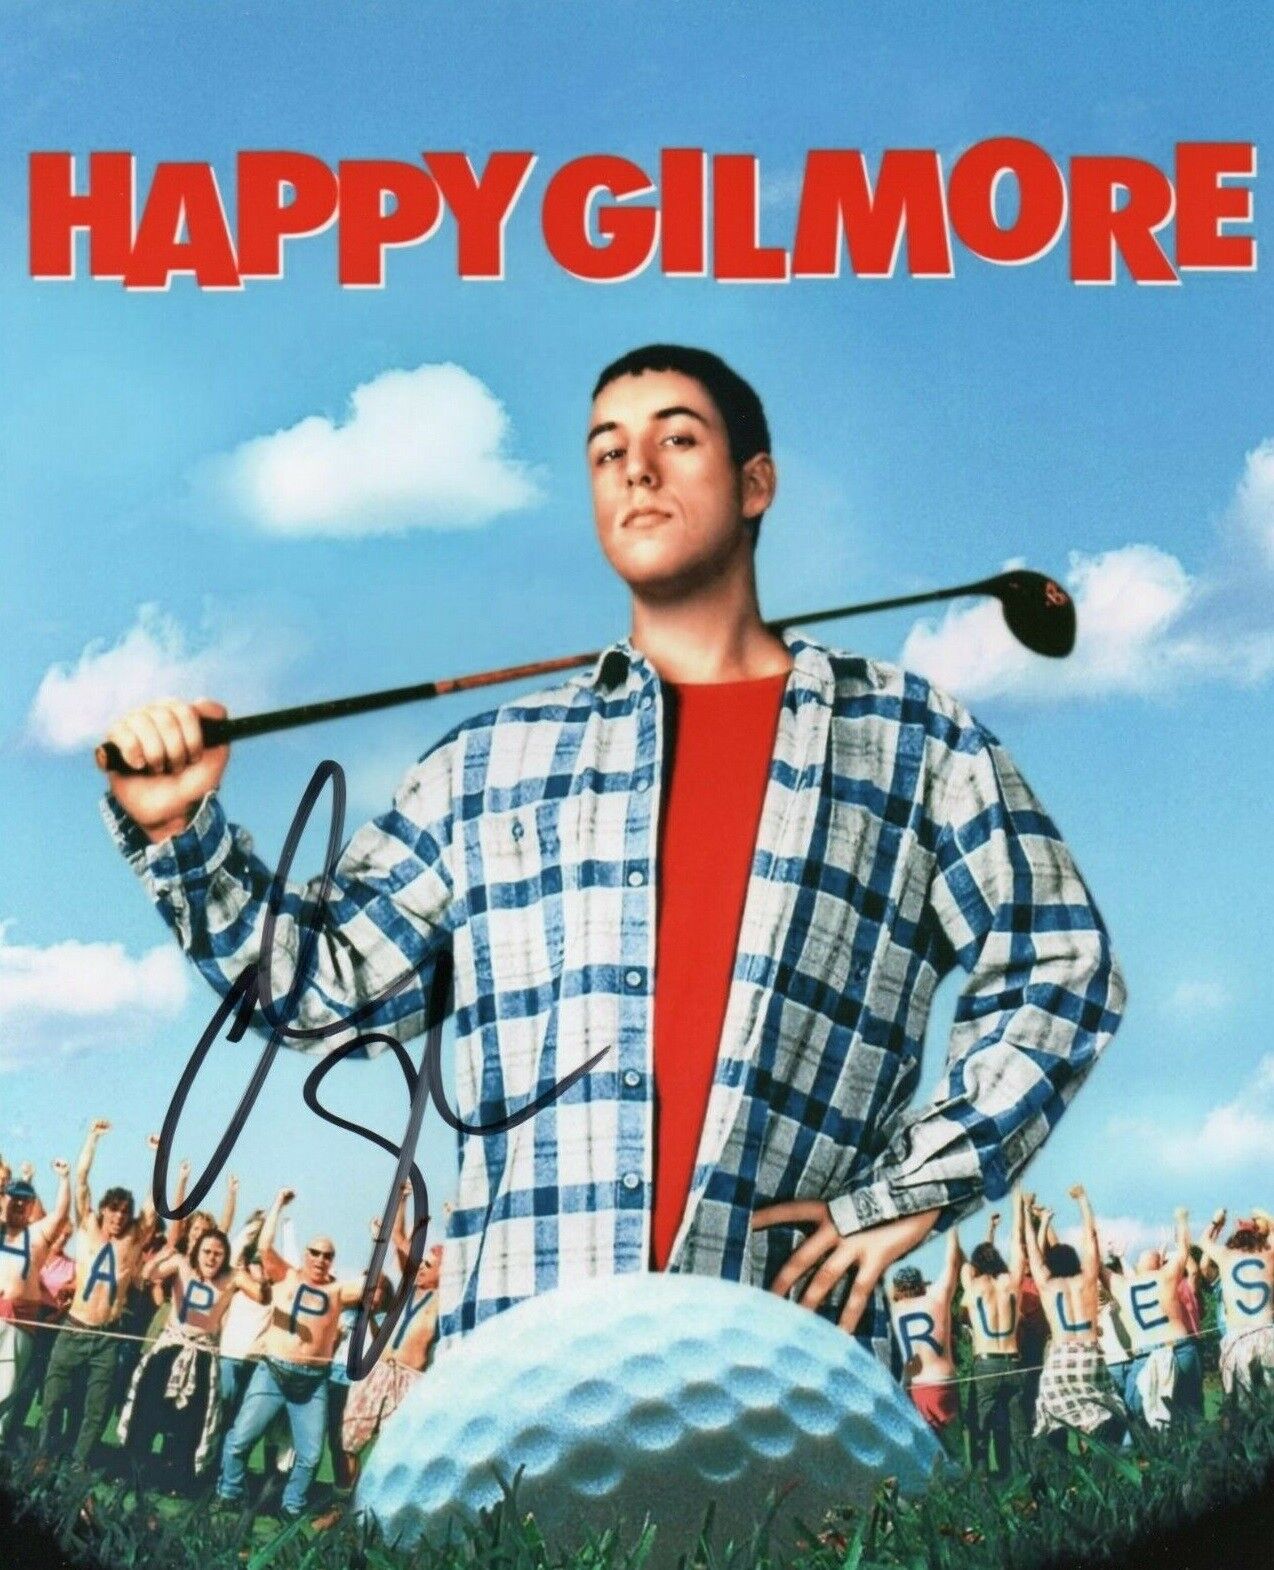 Adam Sandler Autographed Signed 8x10 Photo Poster painting ( Happy Gilmore ) REPRINT